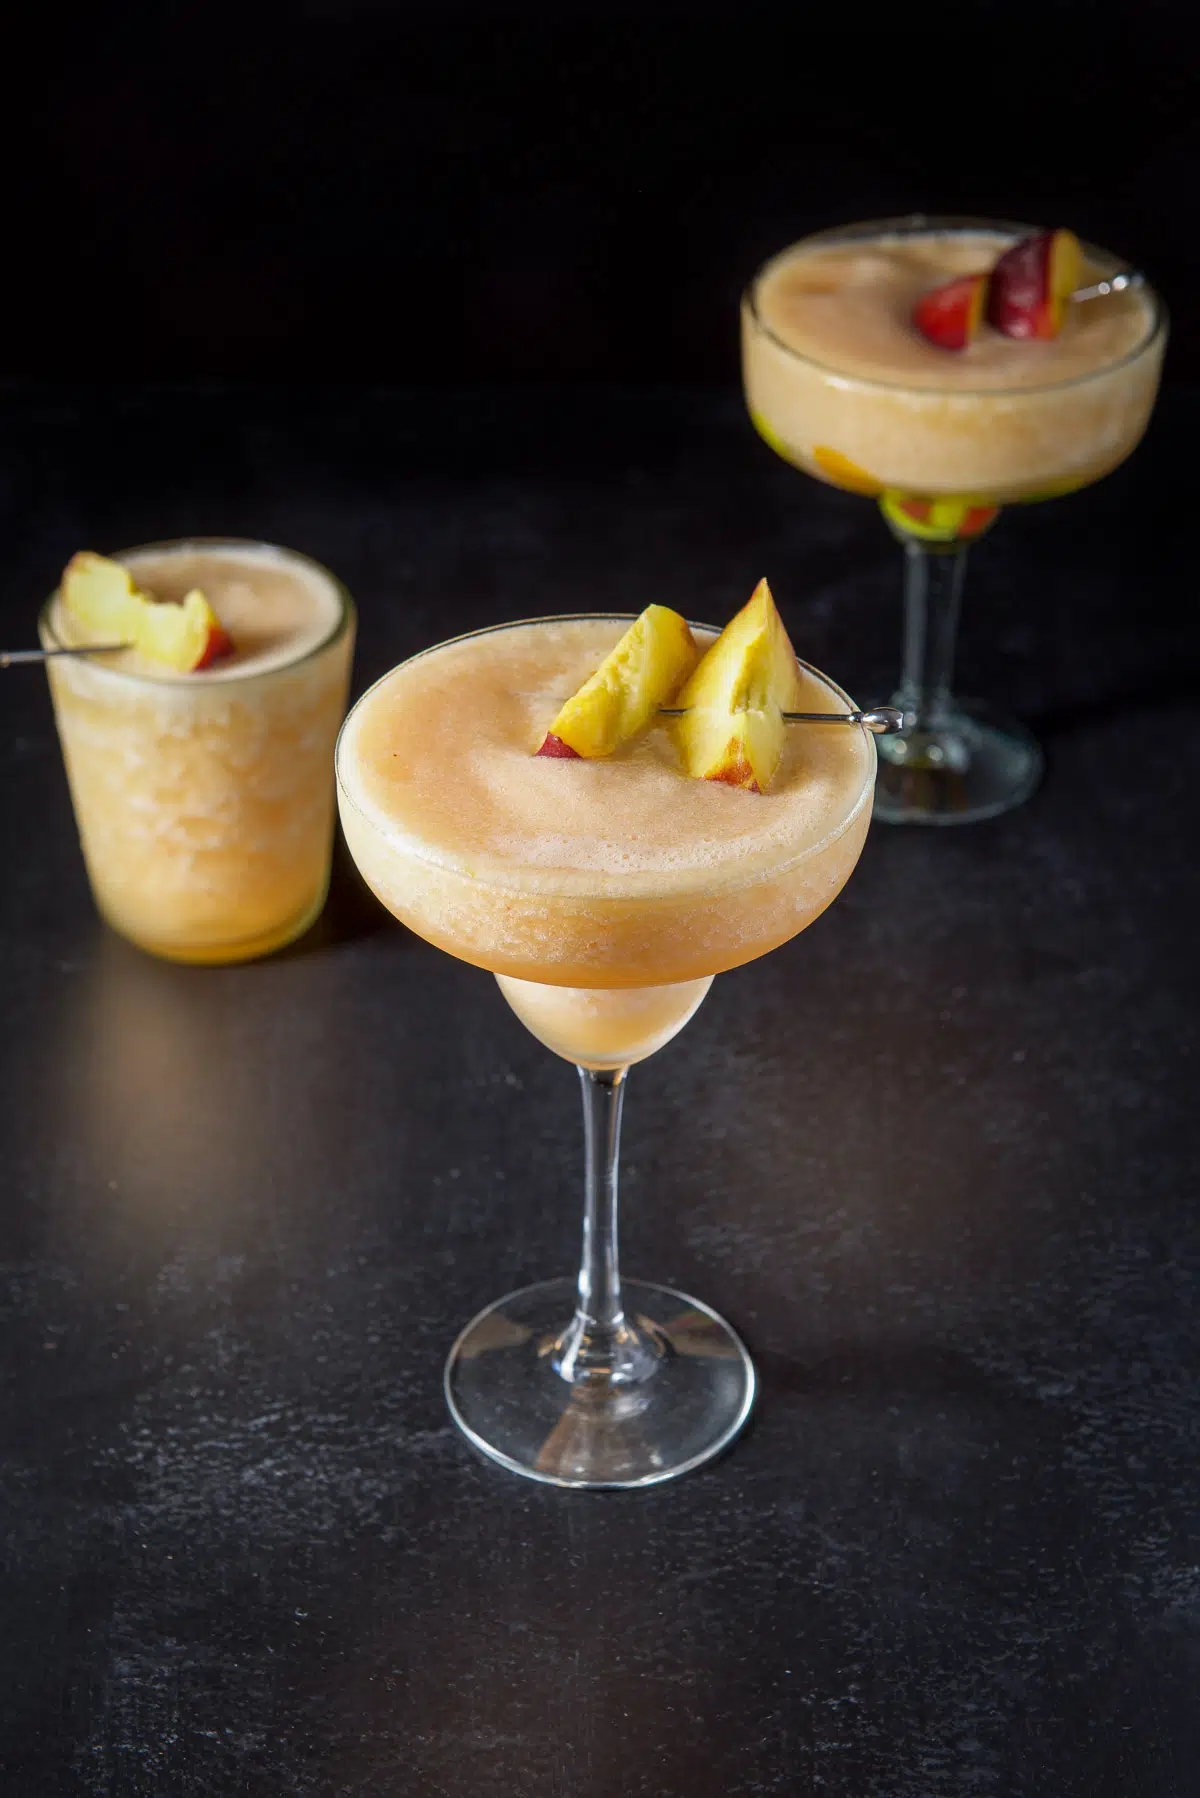 A classic margarita glass filled with the margarita and fresh peach slices with two other glasses in the back